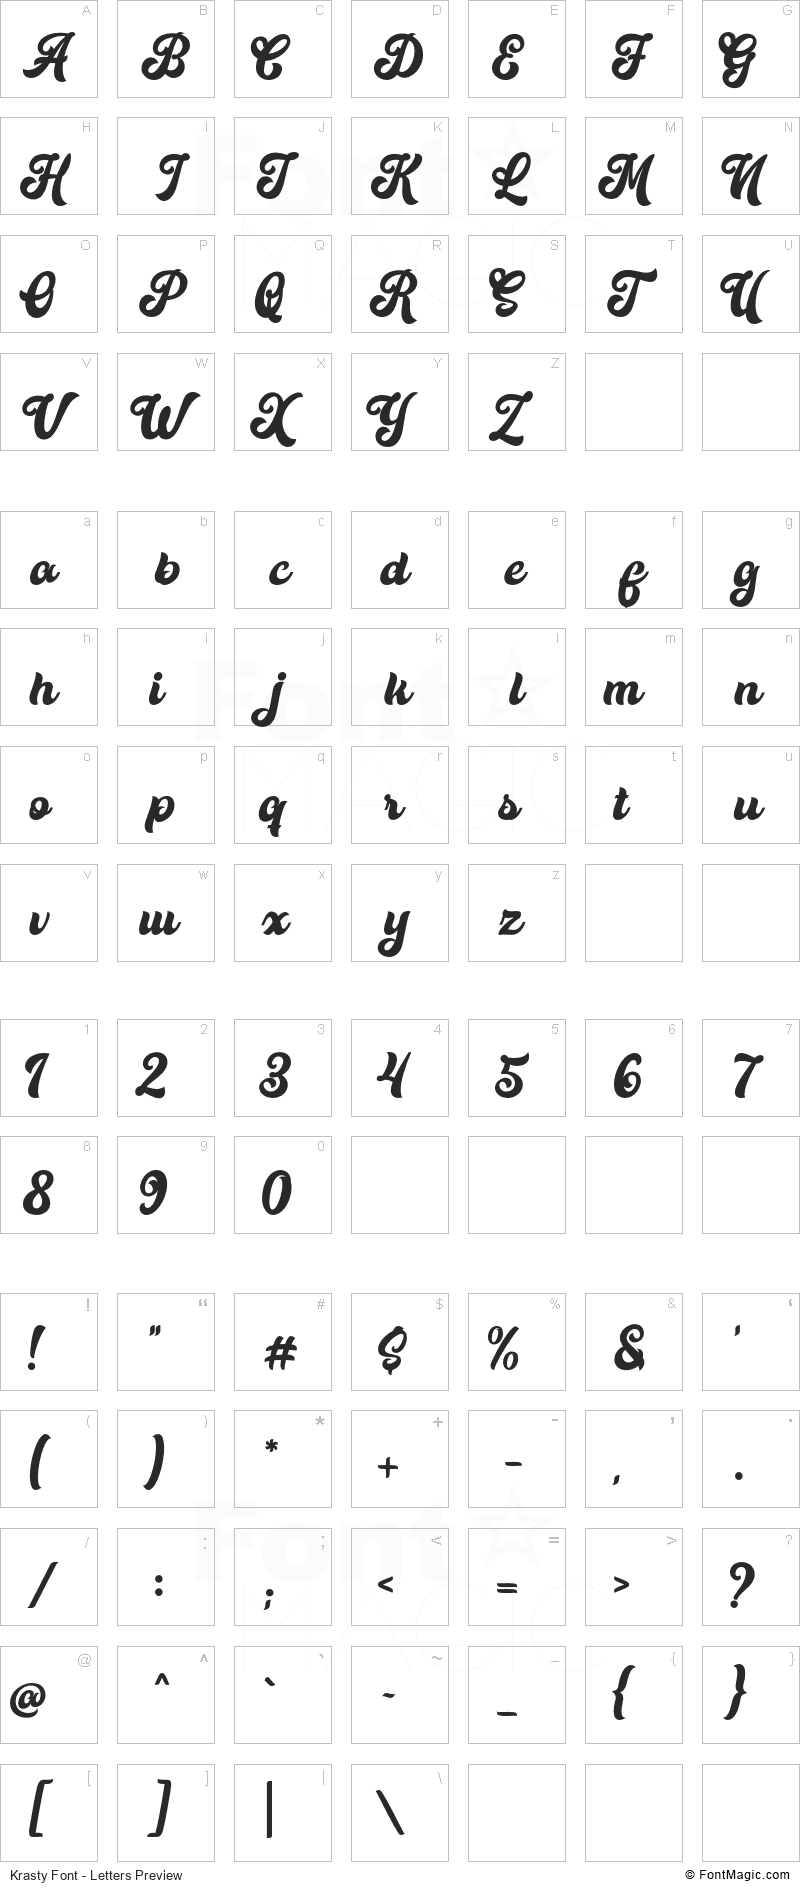 Krasty Font - All Latters Preview Chart